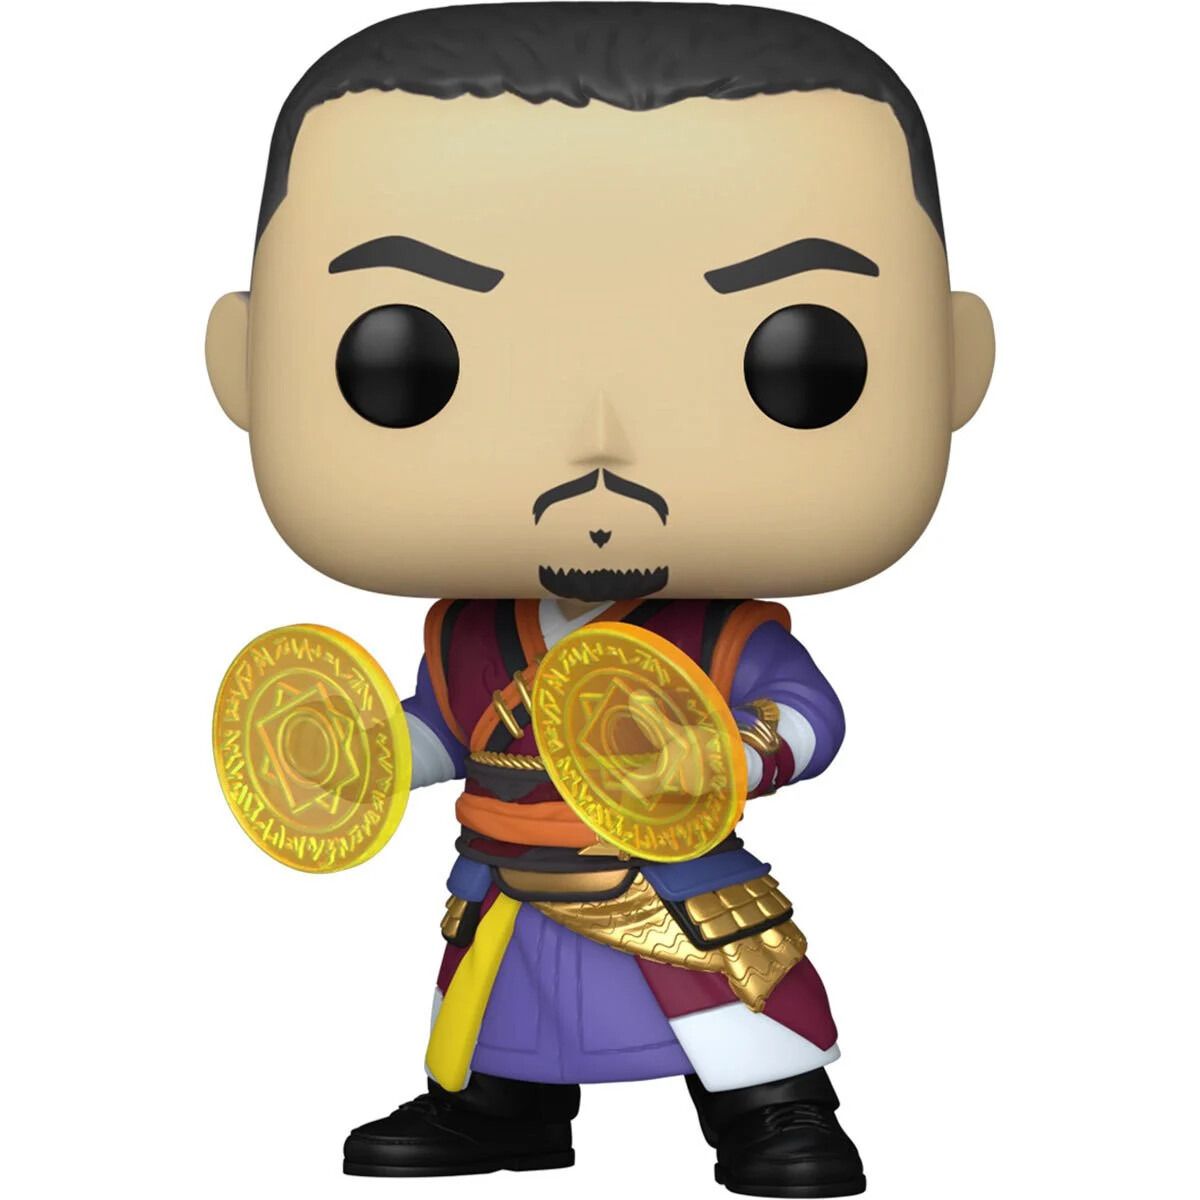 Doctor Strange in the Multiverse of Madness - Wong Pop! Vinyl Figure - 2nd batch